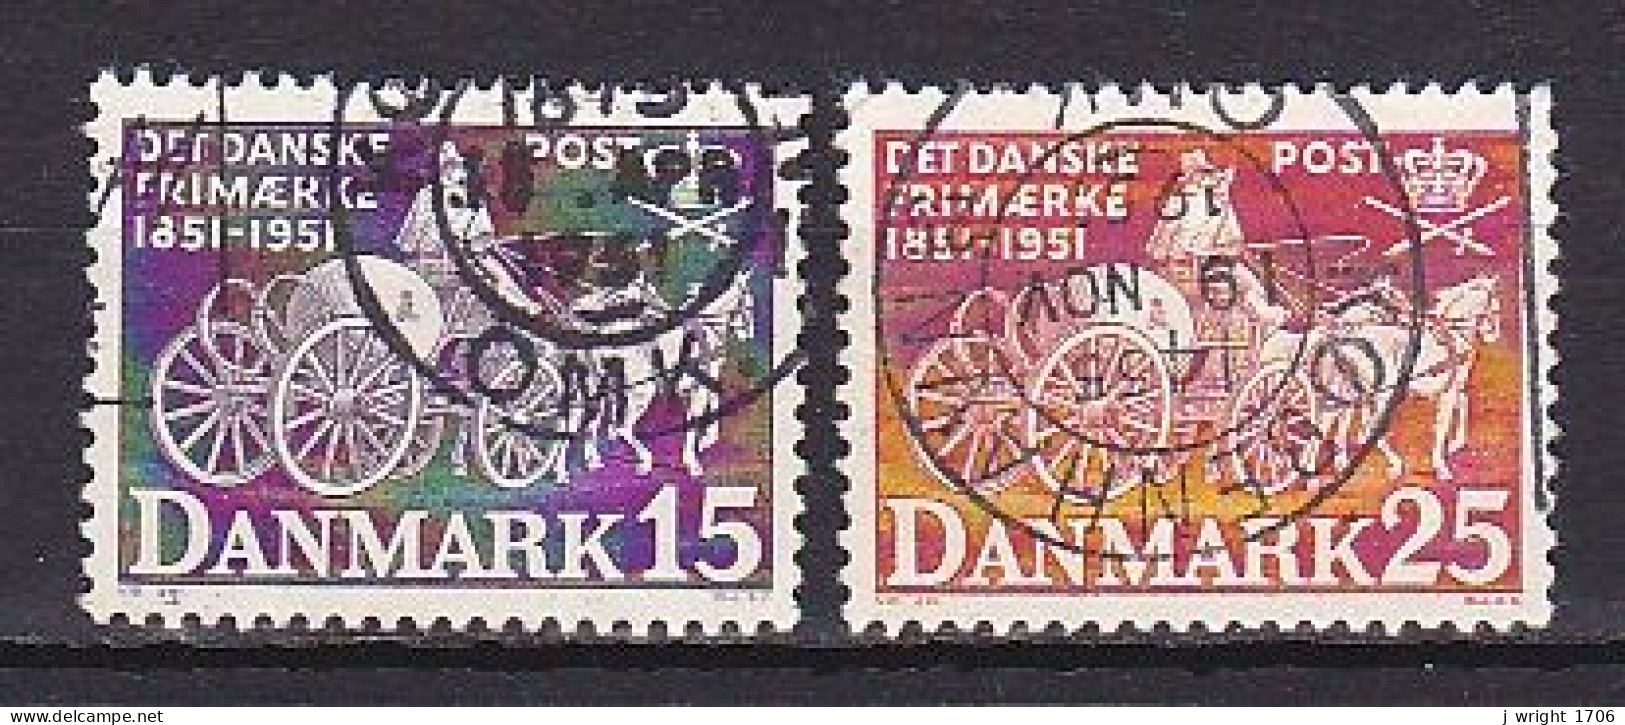 Denmark, 1951, Danish Stamps Centenary, Set, USED - Used Stamps